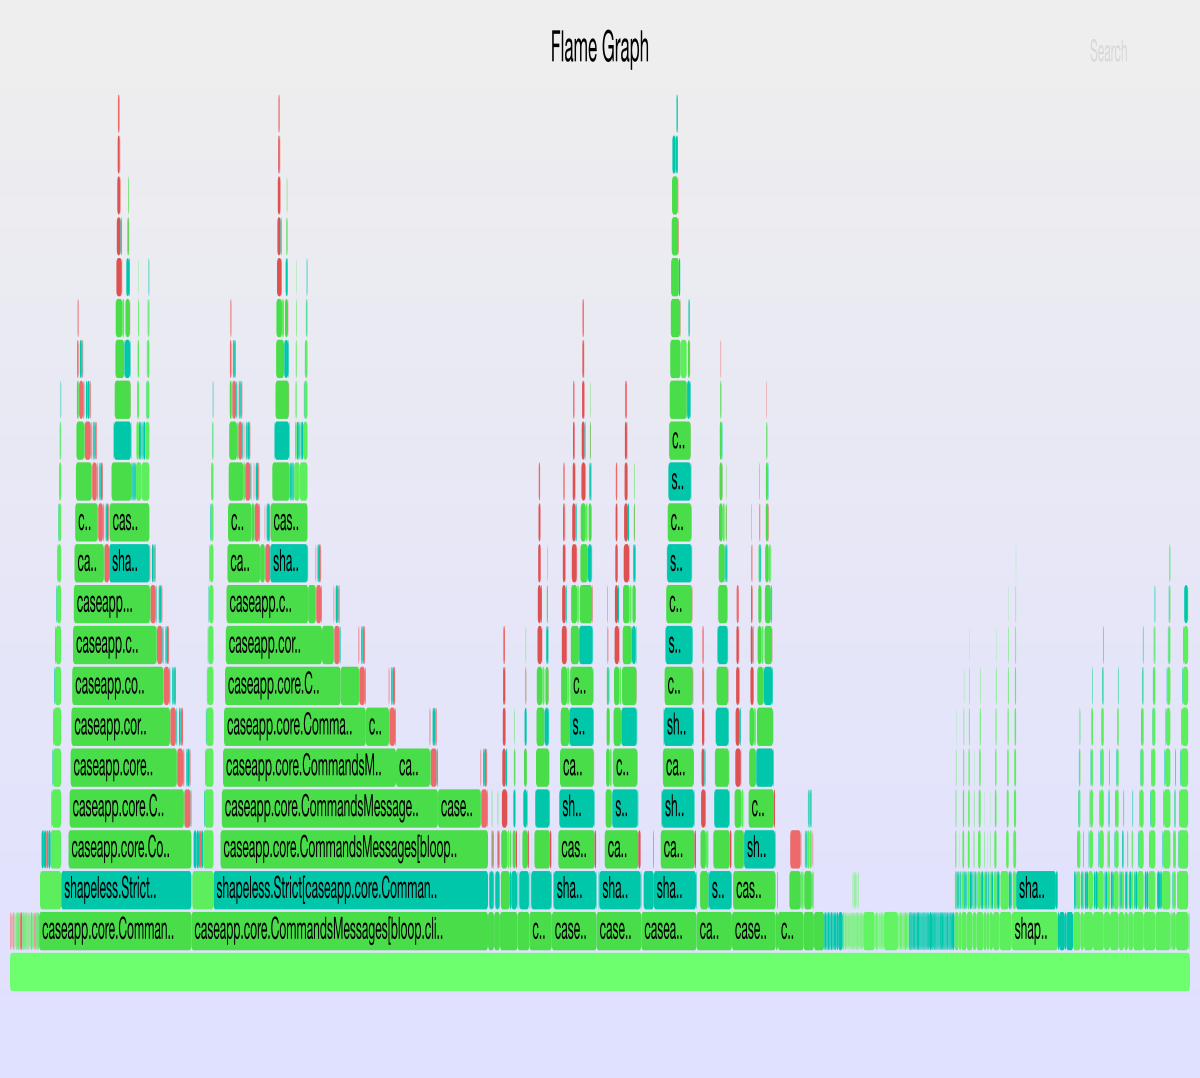 Flamegraph after caching + case-app changes